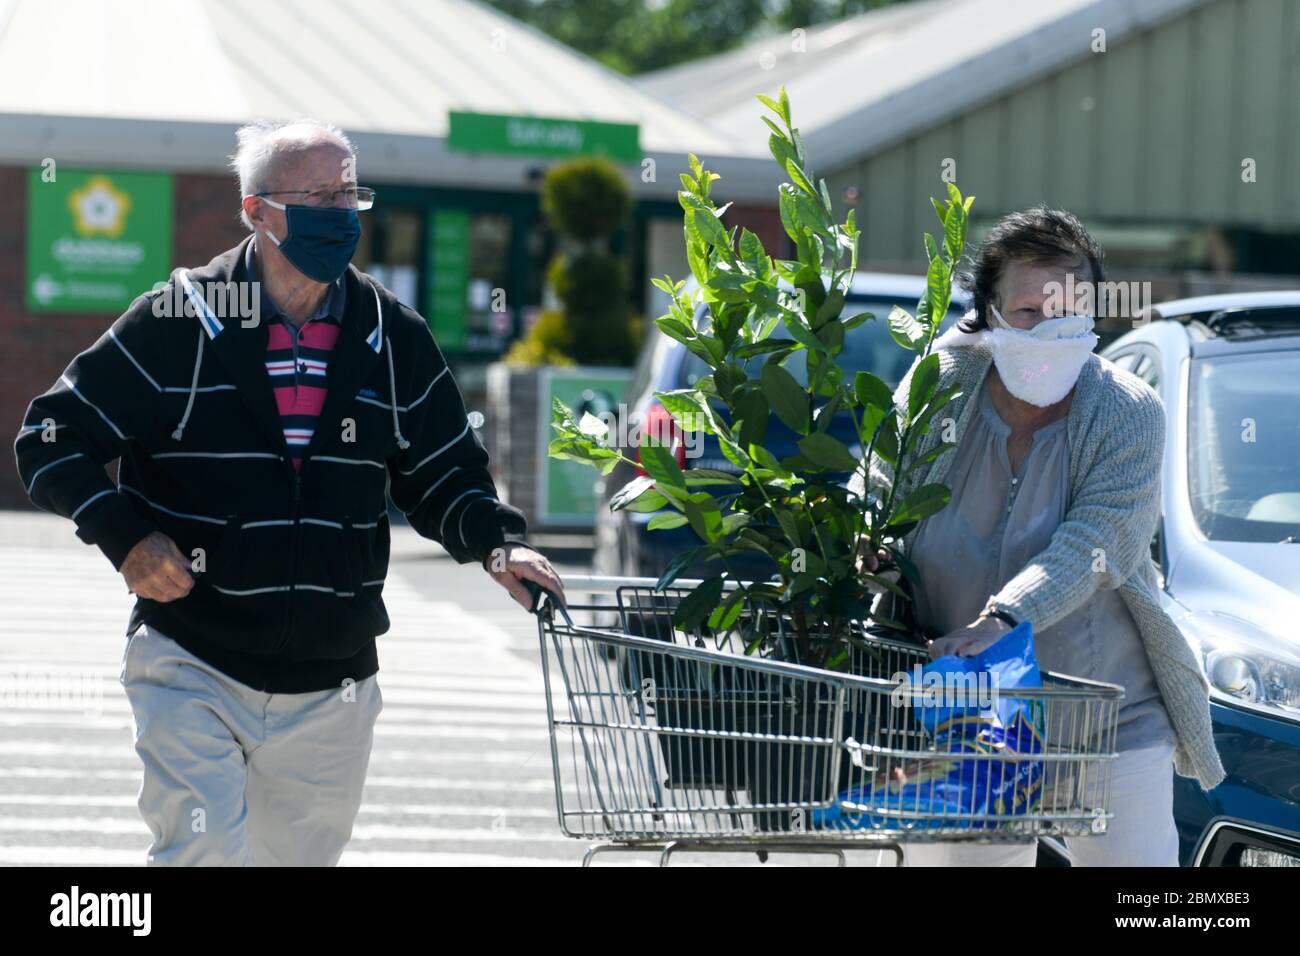 Swansea, UK. 11th May, 2020. A couple leave Dobbies Garden Centre in Swansea after the Welsh Government relaxed rules on the opening of centre's in Wales, with England following suit on Wednesday 13th May. Garden Centres and nurserys will be able to open with social distancing measures in place.   Credit: Robert Melen/Alamy Live News Stock Photo